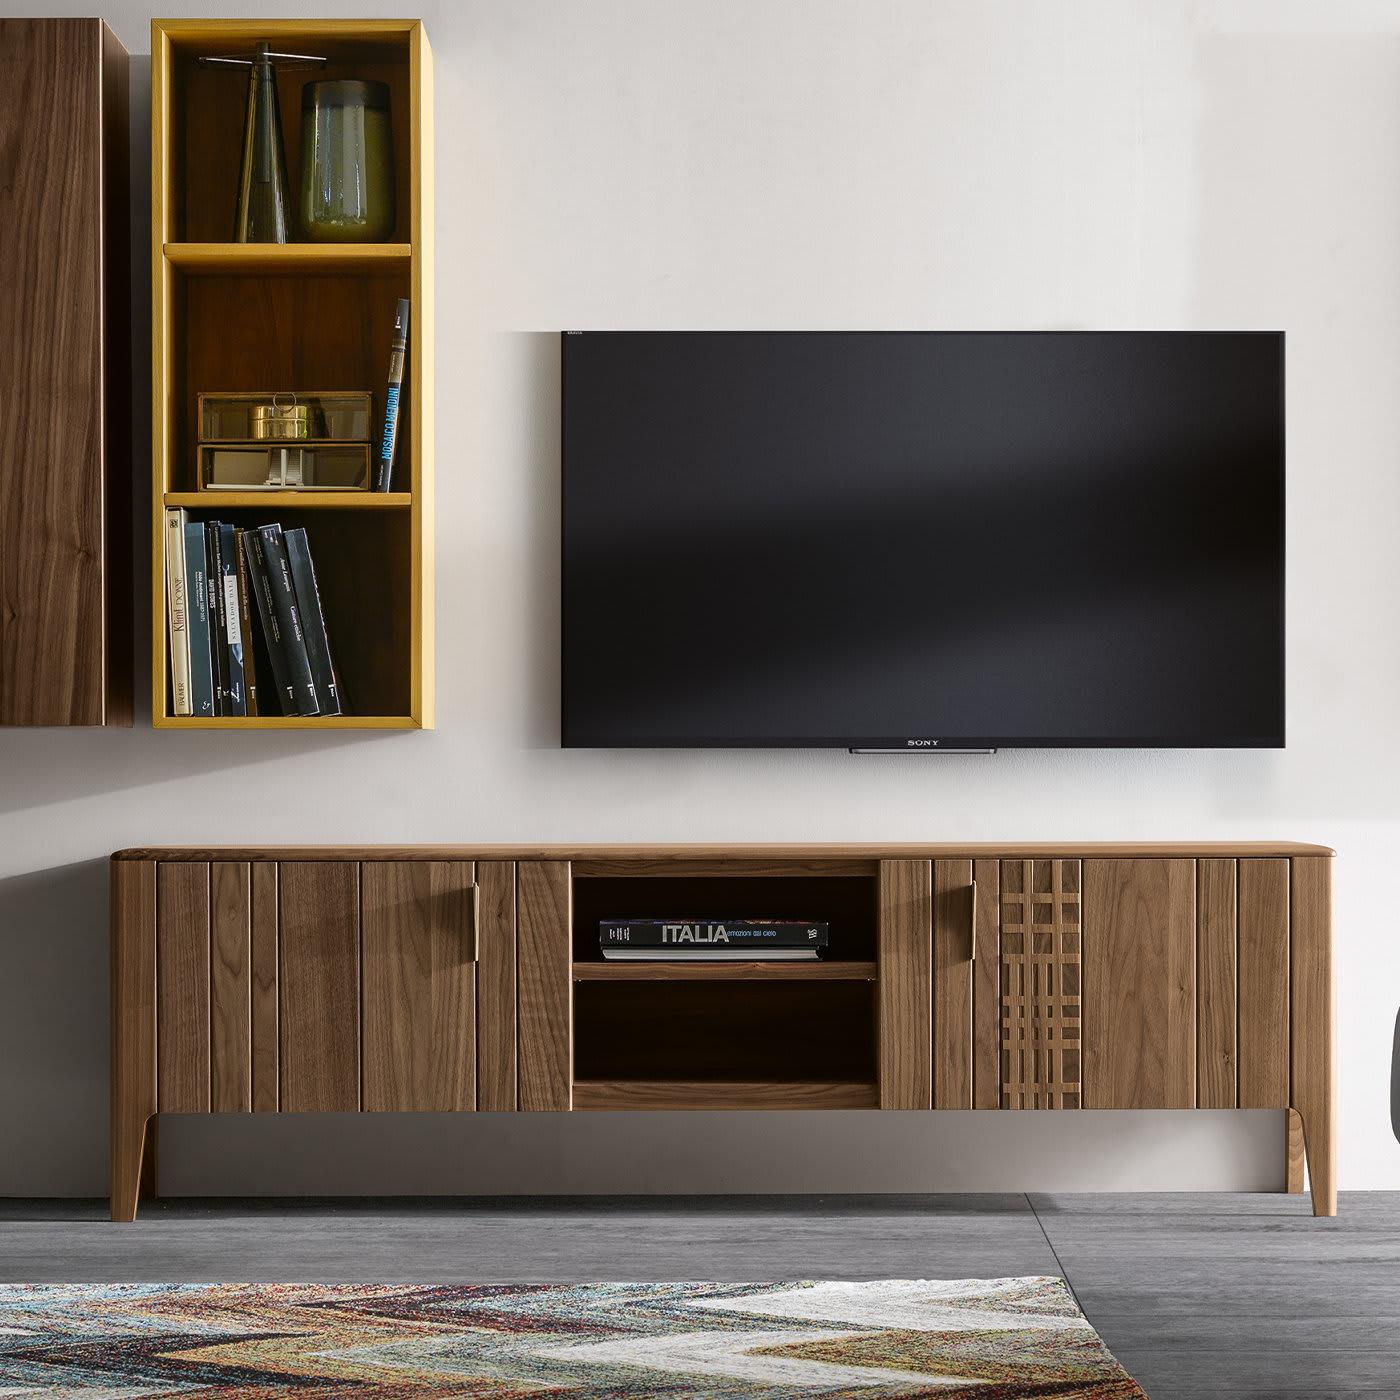 From a complete collection of living room furnishings in warm Canaletto walnut, the Domino TV Stand features vertical panels across its cabinets. Making the piece truly stand out is the sheer Havana stain, allowing the wood's natural veins and